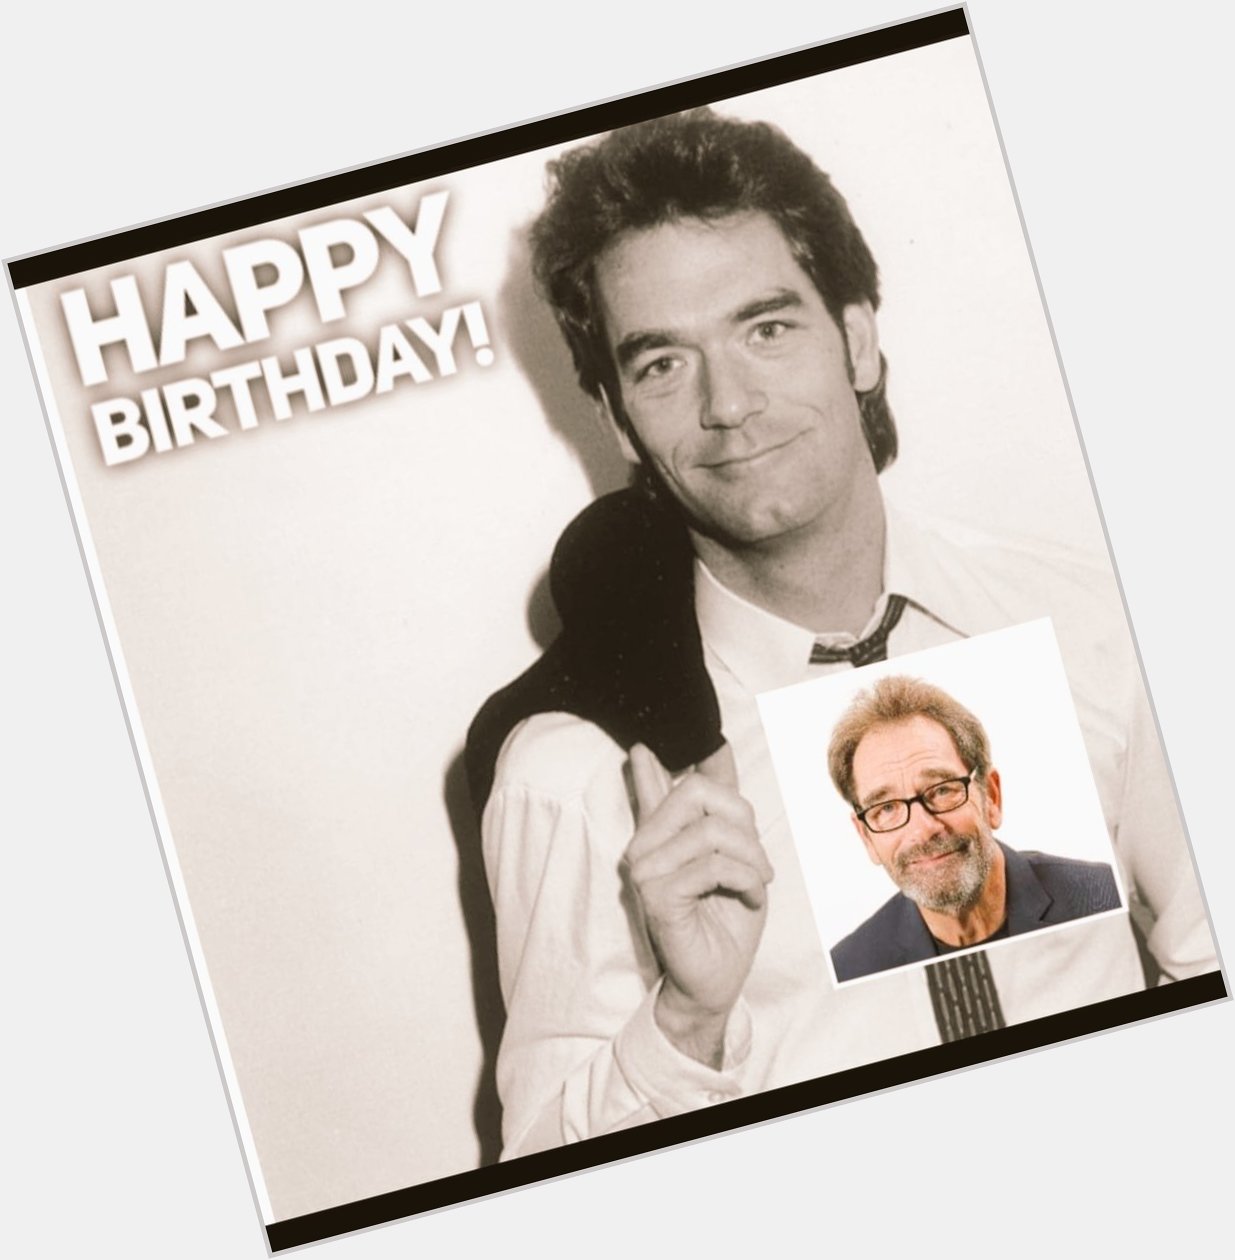 HAPPY BIRTHDAY  Huey Lewis ( and the News )
July 5, 1950 